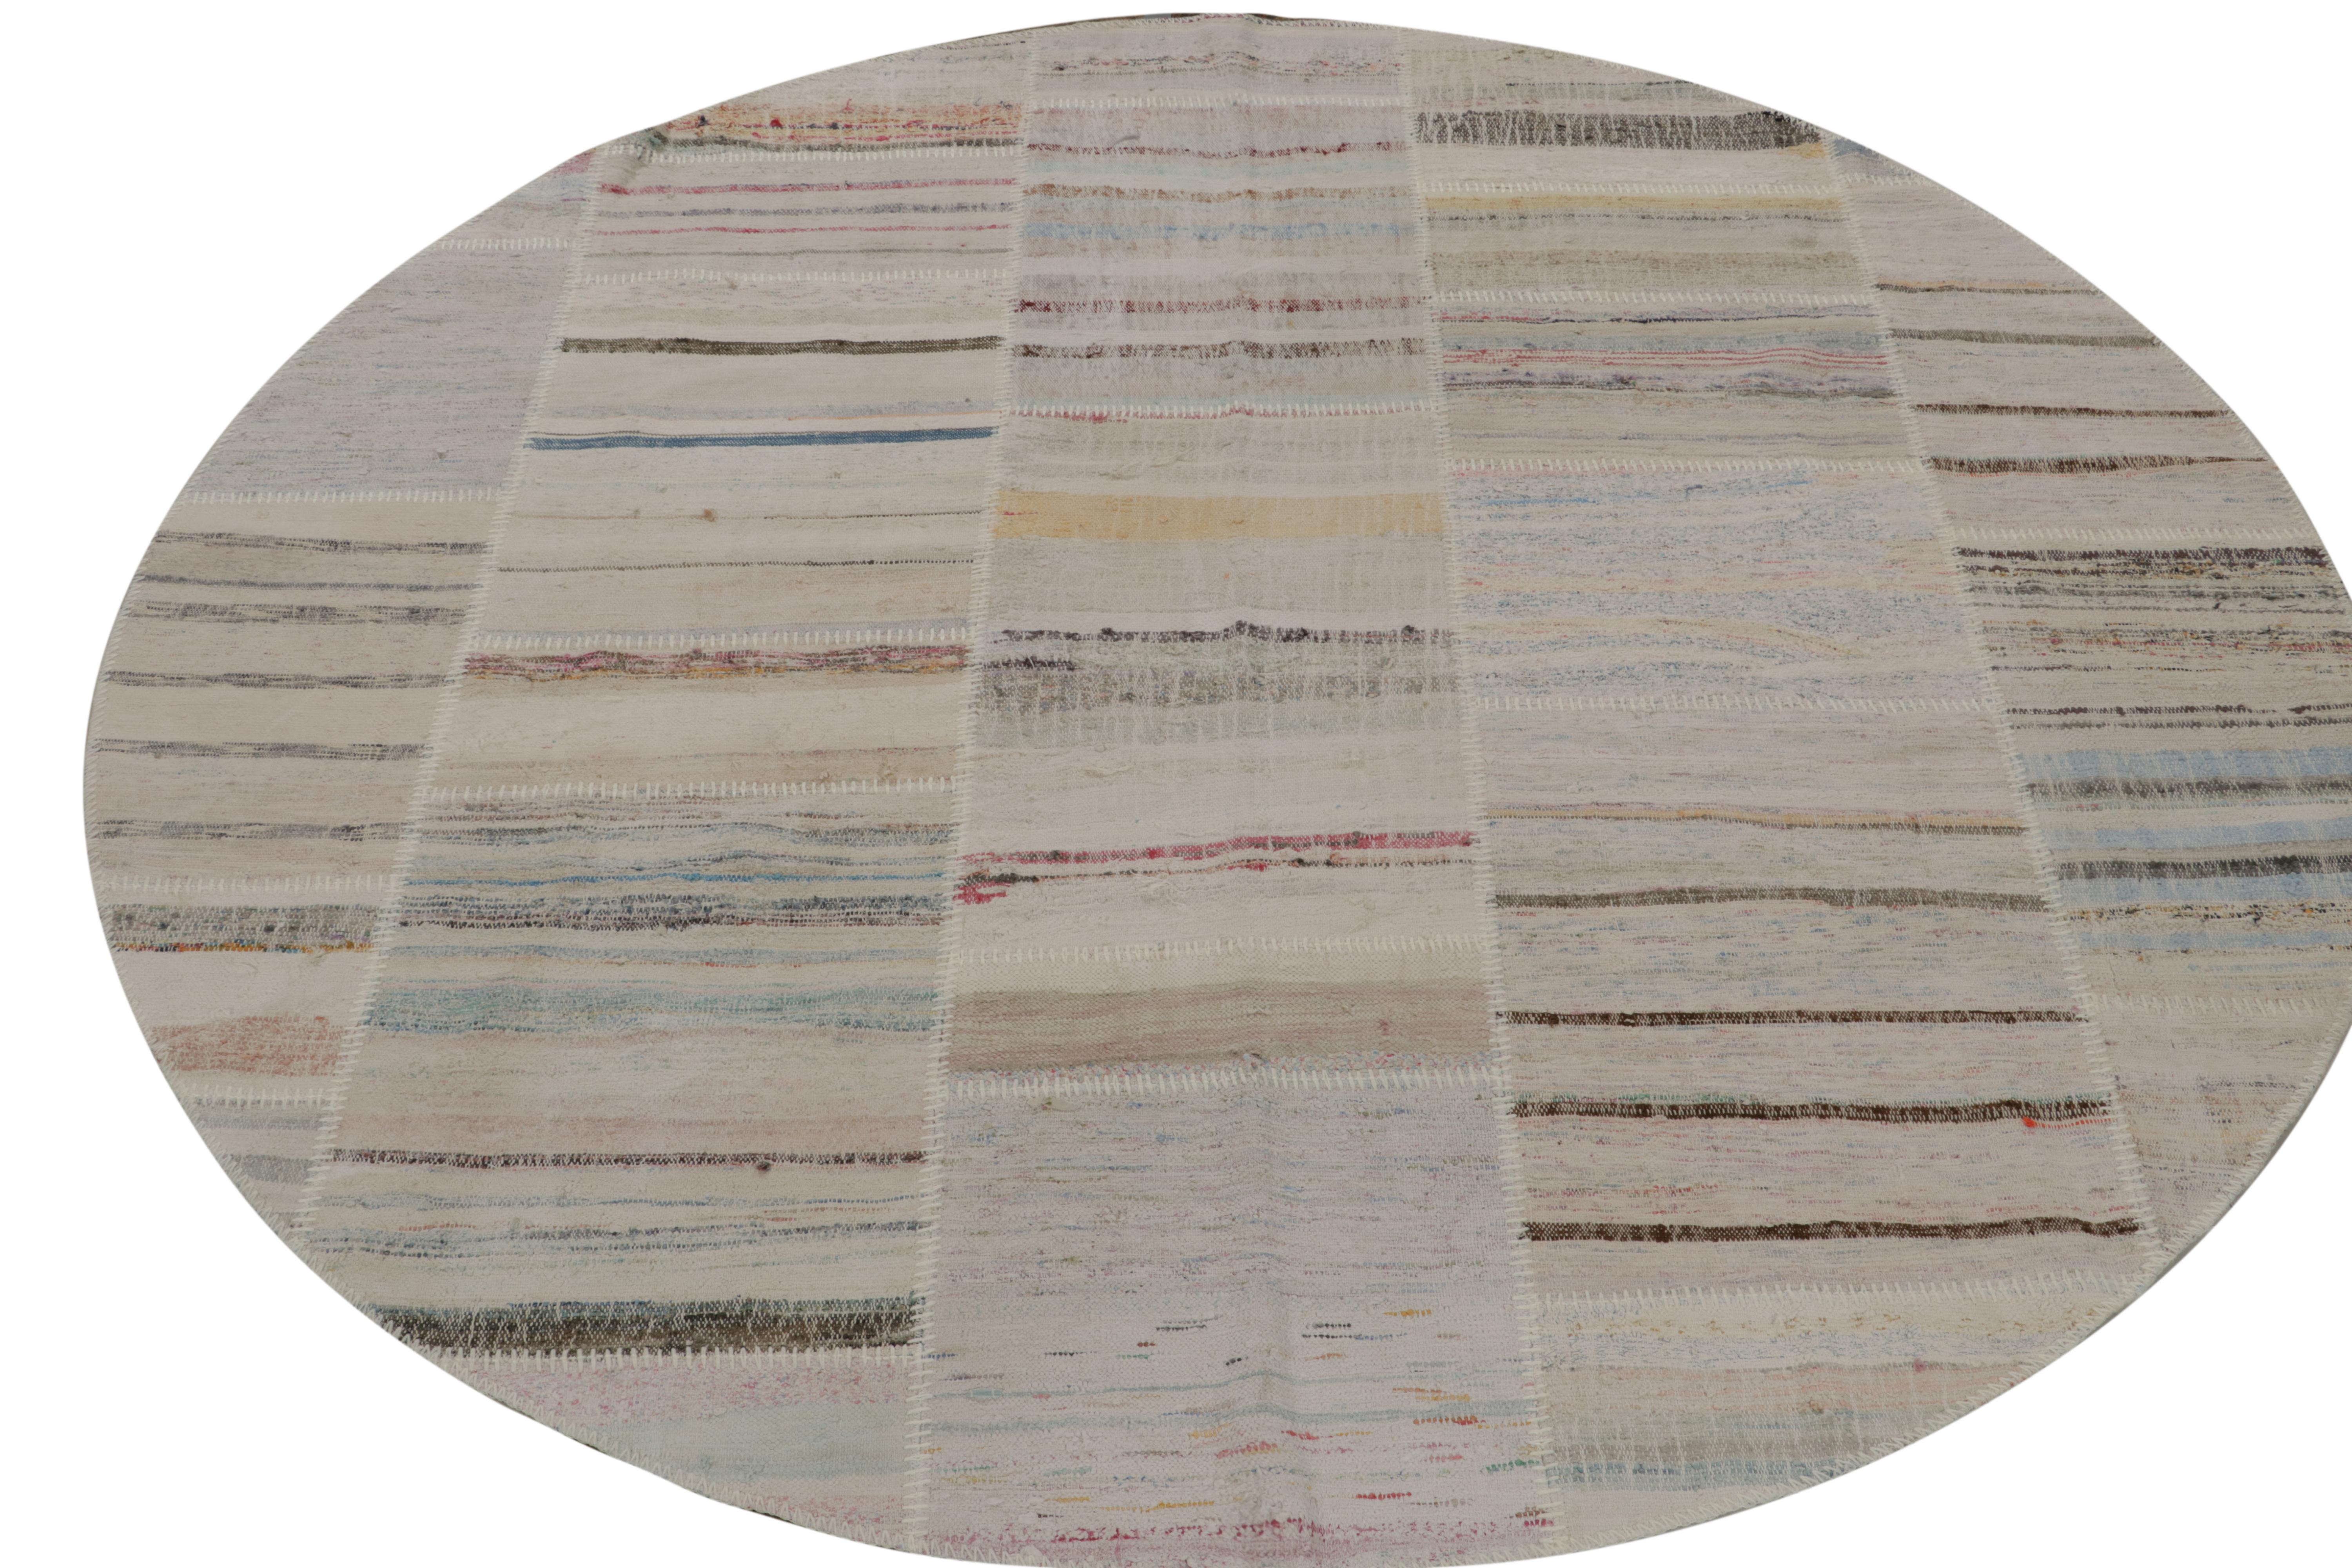 Handwoven in wool, Rug & Kilim presents a spacious 8x8 circle rug from their innovative new patchwork kilim collection. 

On the Design: 

This flat weave technique repurposes vintage yarns in polychromatic stripes and striae, achieving a playful